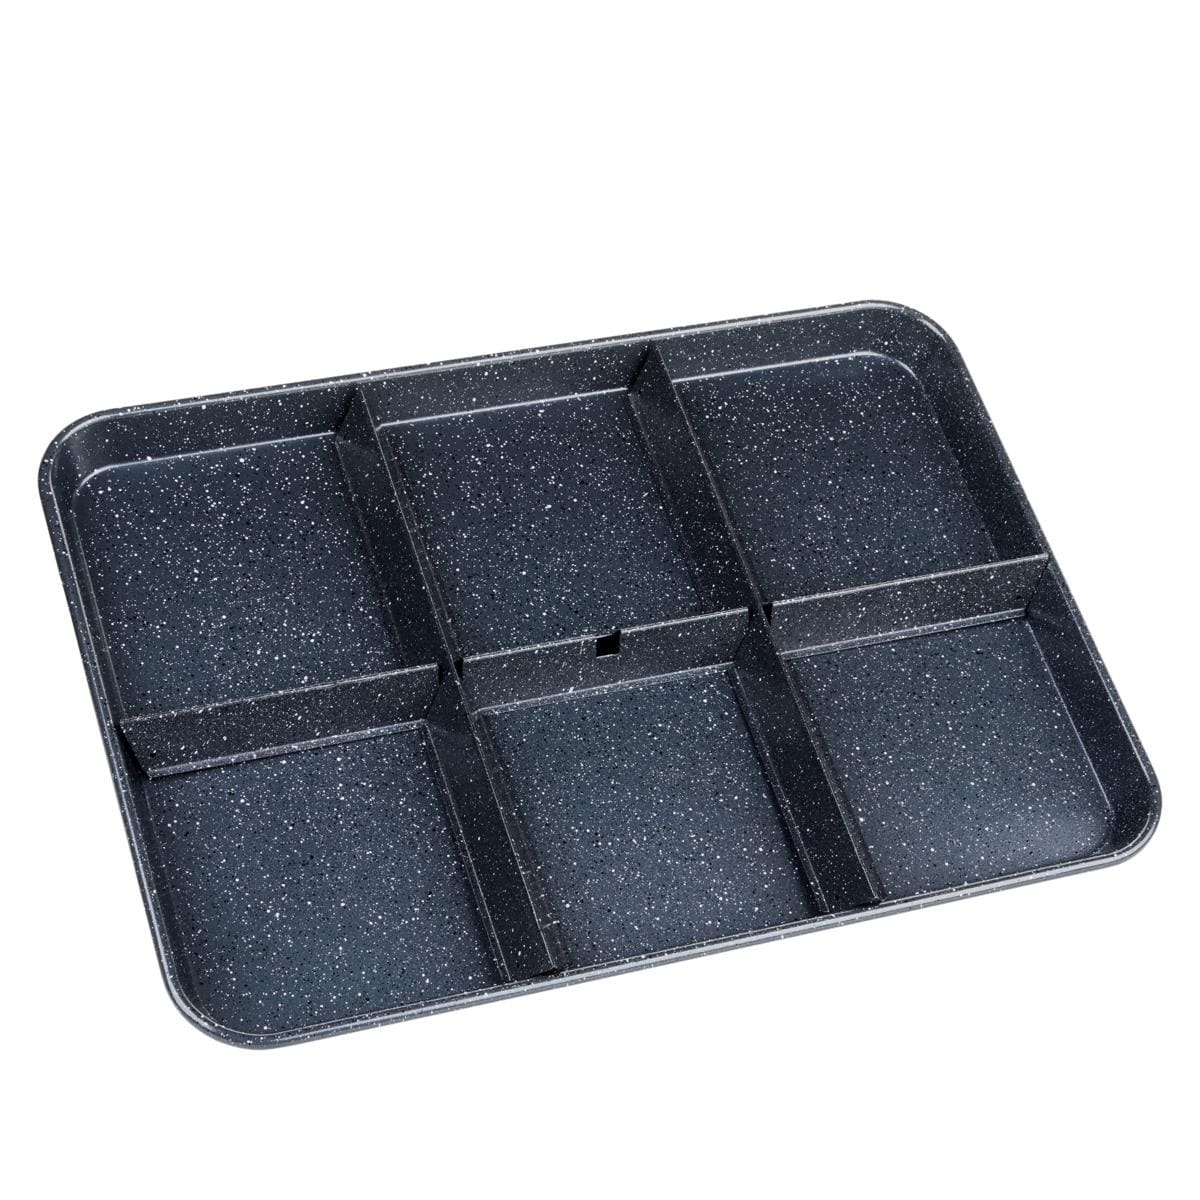 https://ak1.ostkcdn.com/images/products/is/images/direct/1292a6630fb49a110a720f9b221170b101d87508/Curtis-Stone-Dura-Bake-Divided-Sheet-Pan-Set-Model-720-525.jpg